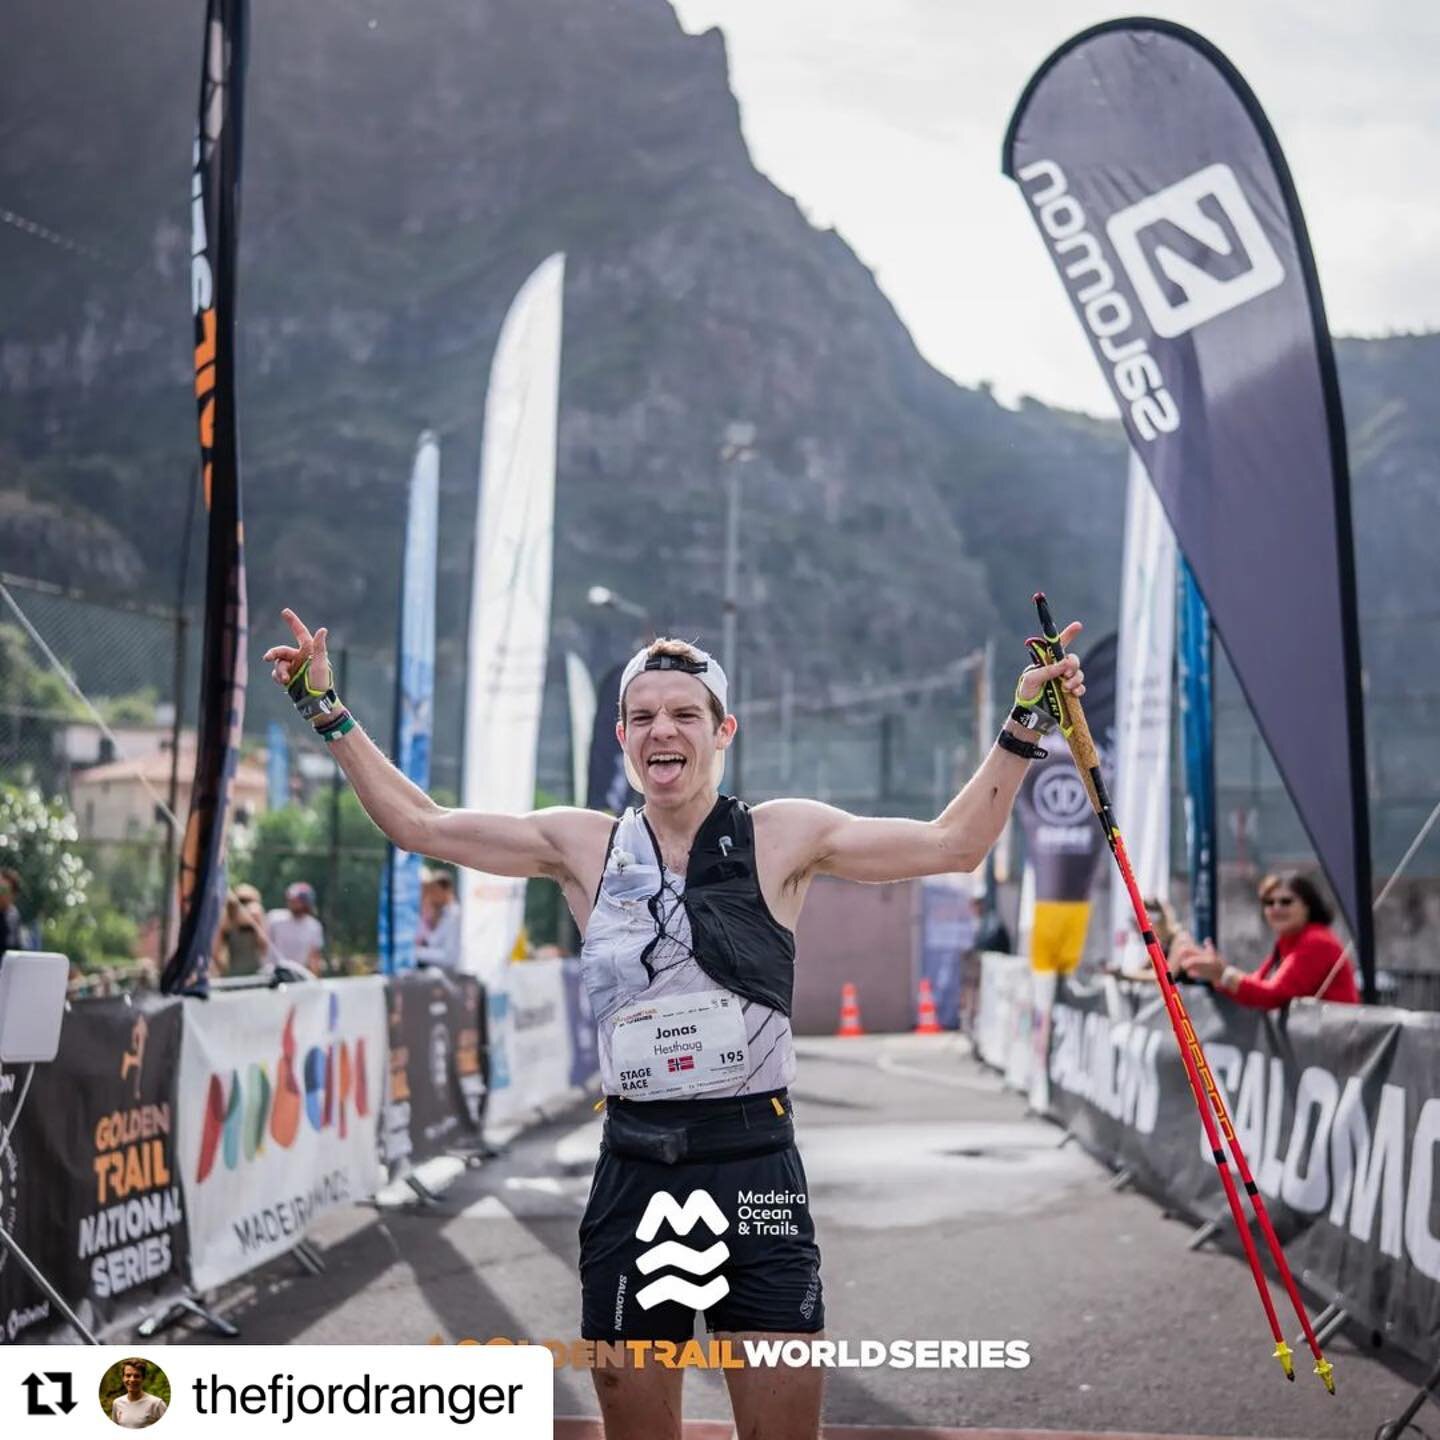 Brilliant week seeing coached athlete @thefjordranger competing at the GTWS world finals and absolutely smashing it 👏👏👏 
I&rsquo;m so proud of what you&rsquo;ve achieved and this is just a glimpse of what is to come as you prove yourself on the wo